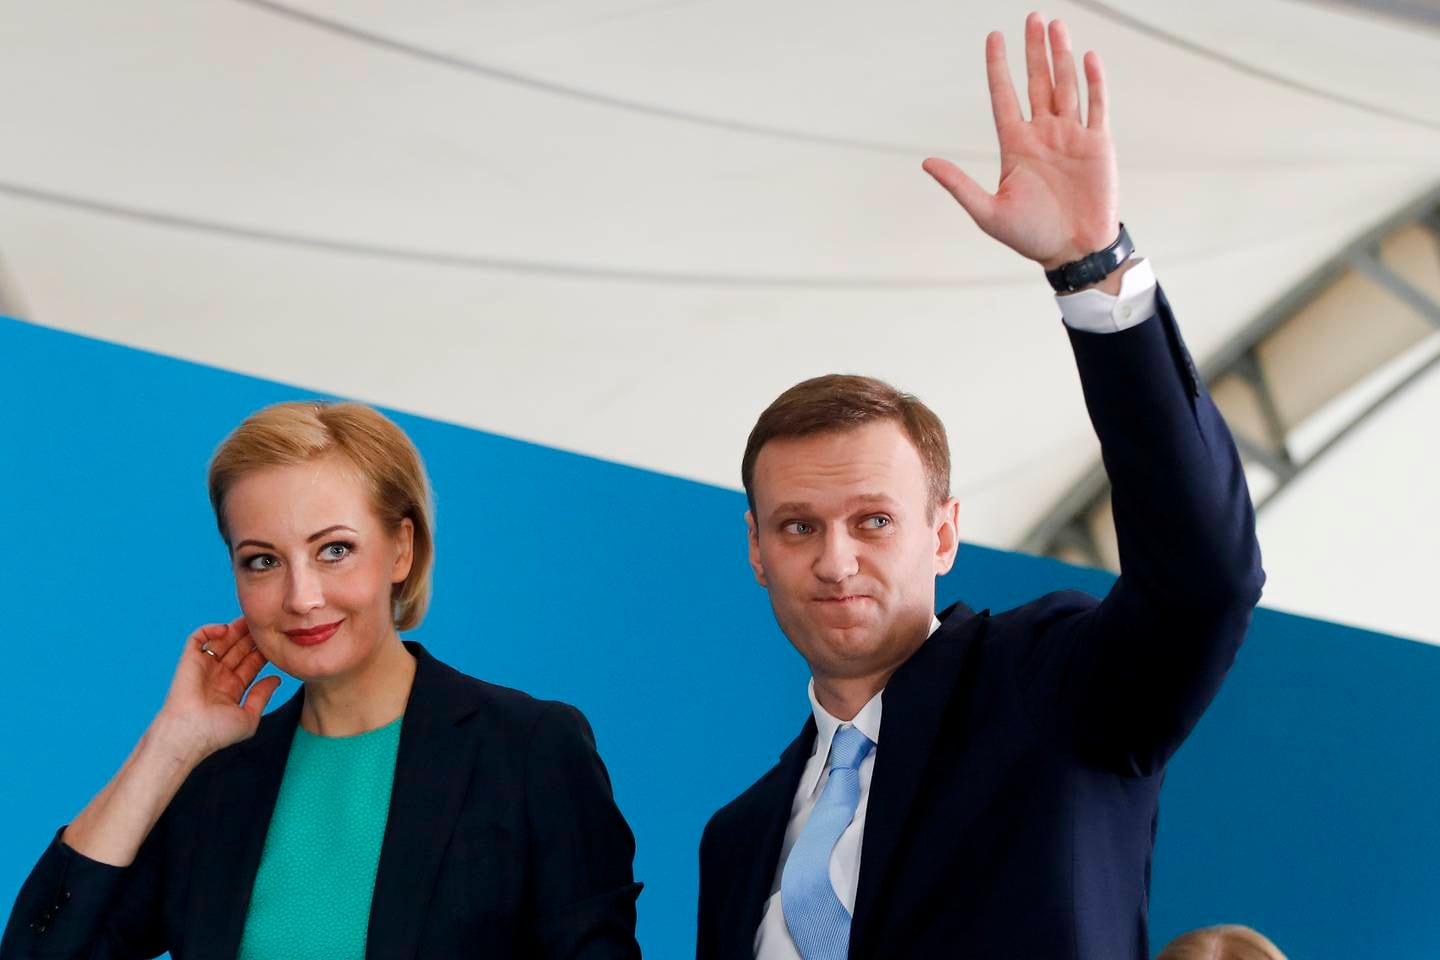 Russian opposition leader Alexei Navalny and his wife Yulia attend his supporters' meeting that nominated him for the presidential election race in Moscow, Russia, Sunday, Dec. 24, 2017. Nevertheless, the 41-year-old anti-corruption crusader has run a yearlong grass-roots campaign and staged waves of rallies to push the Kremlin to let him run. (AP Photo/Pavel Golovkin)